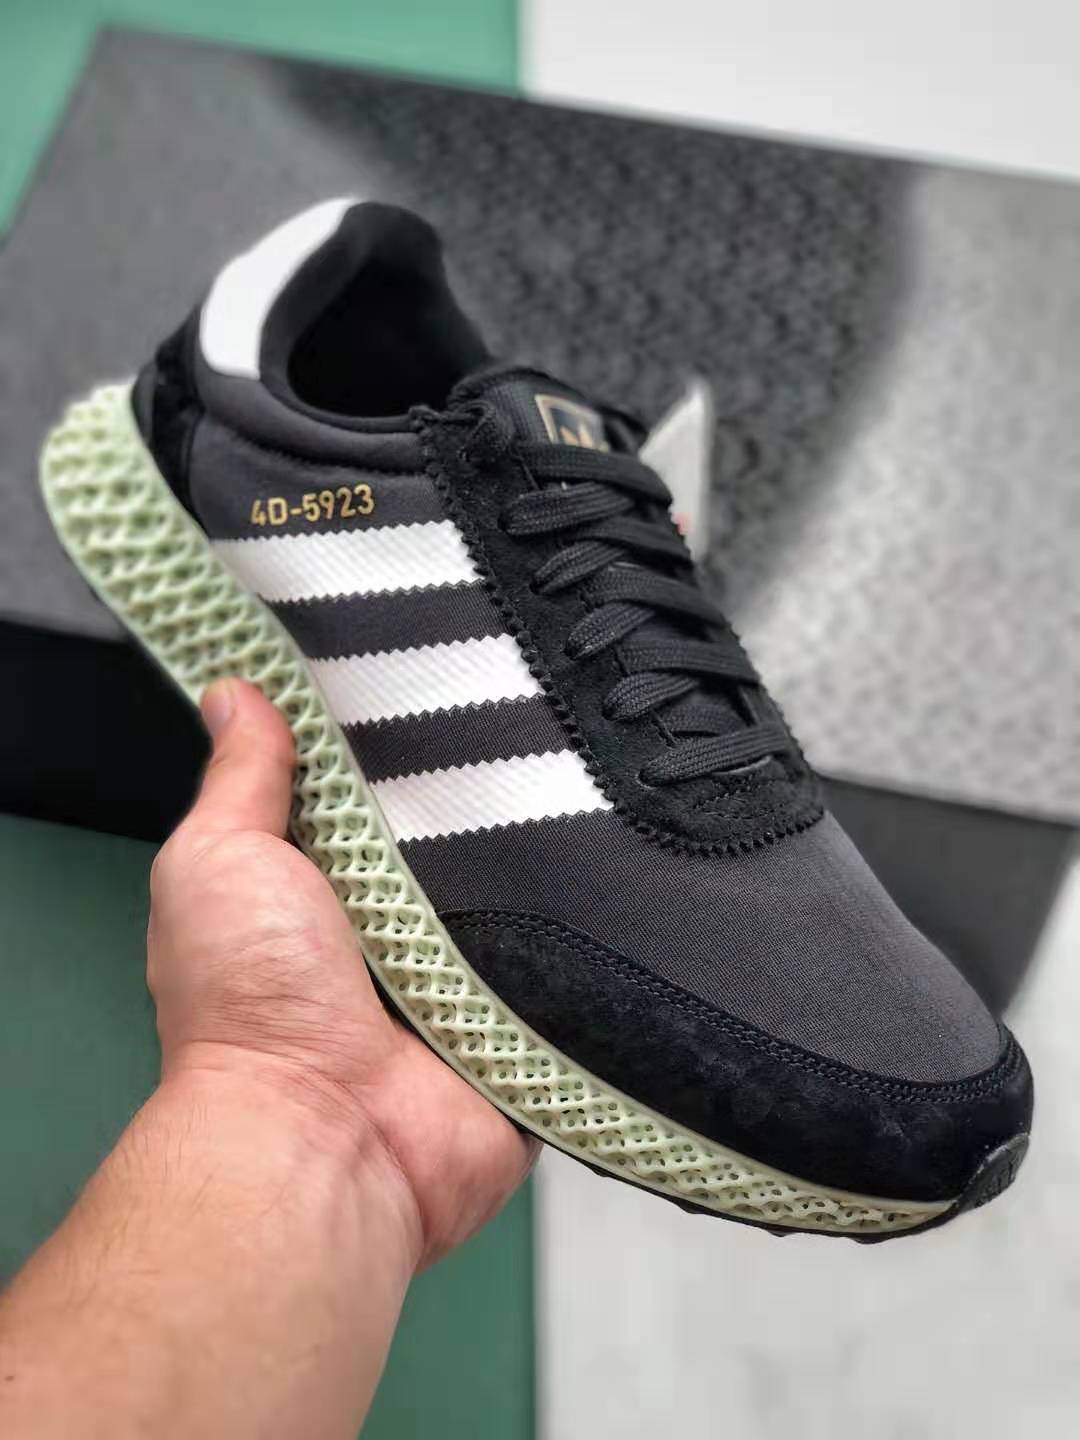 Adidas Futurecraft 4D-5923 Black EE3657 | Shop Now for Innovative Sneakers!